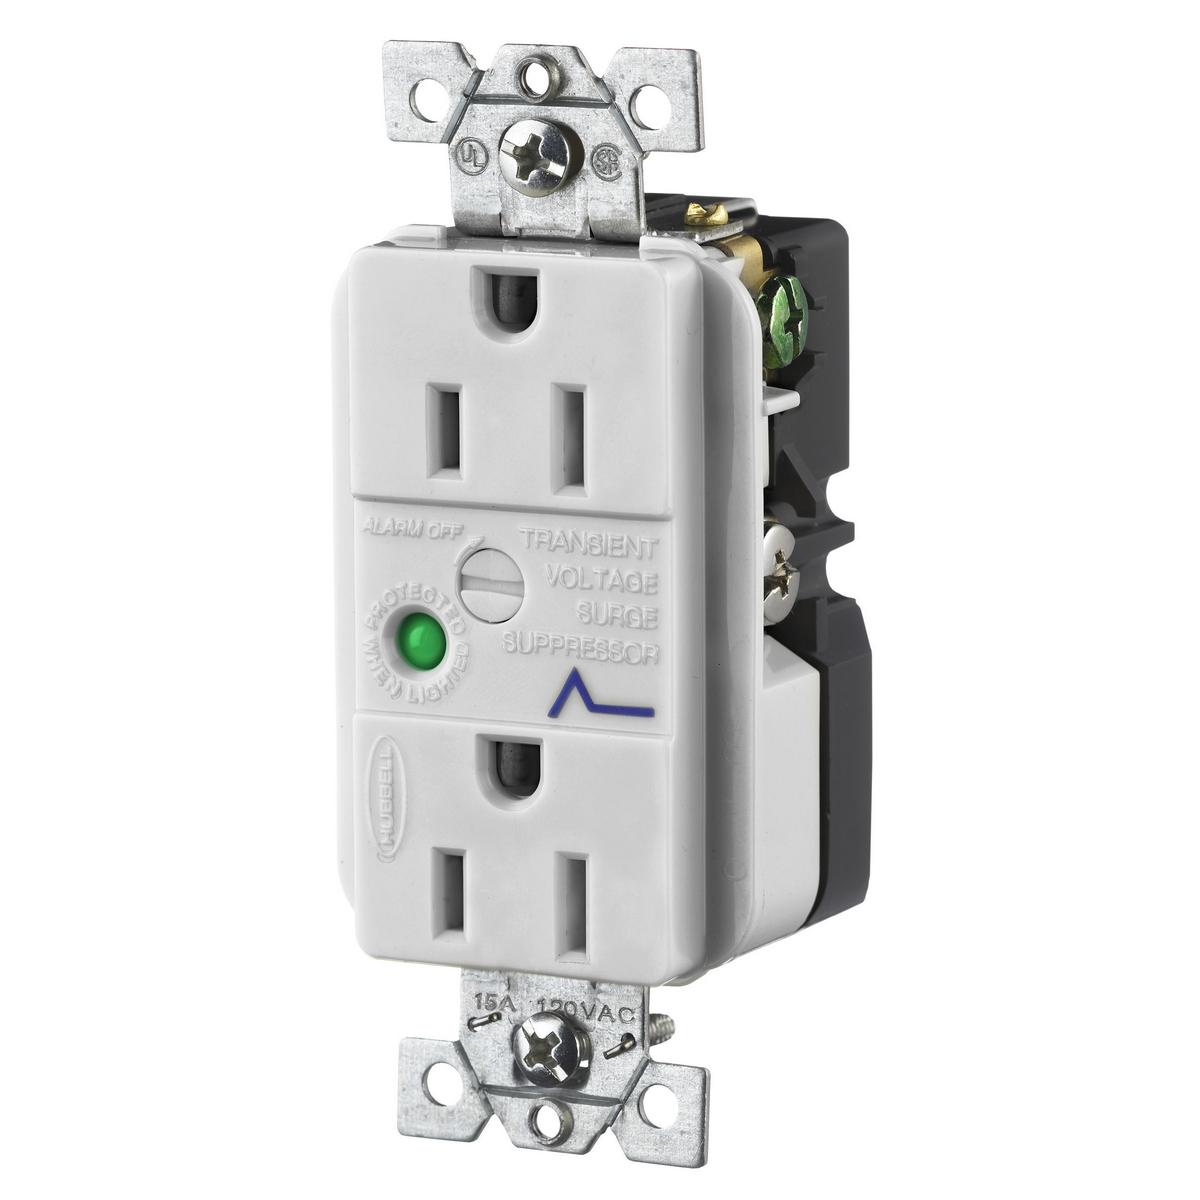 Hubbell HBL5262OWSA TVSS Duplex Receptacle with Light and Alarm, 15A 125V, 5-15R, Gray  ; Automatic self-grounding staple ; Distinctive surge symbol provides quick identification ; Power-on indicator light verifies that power is available ; Alert alarm sounds when surge prot